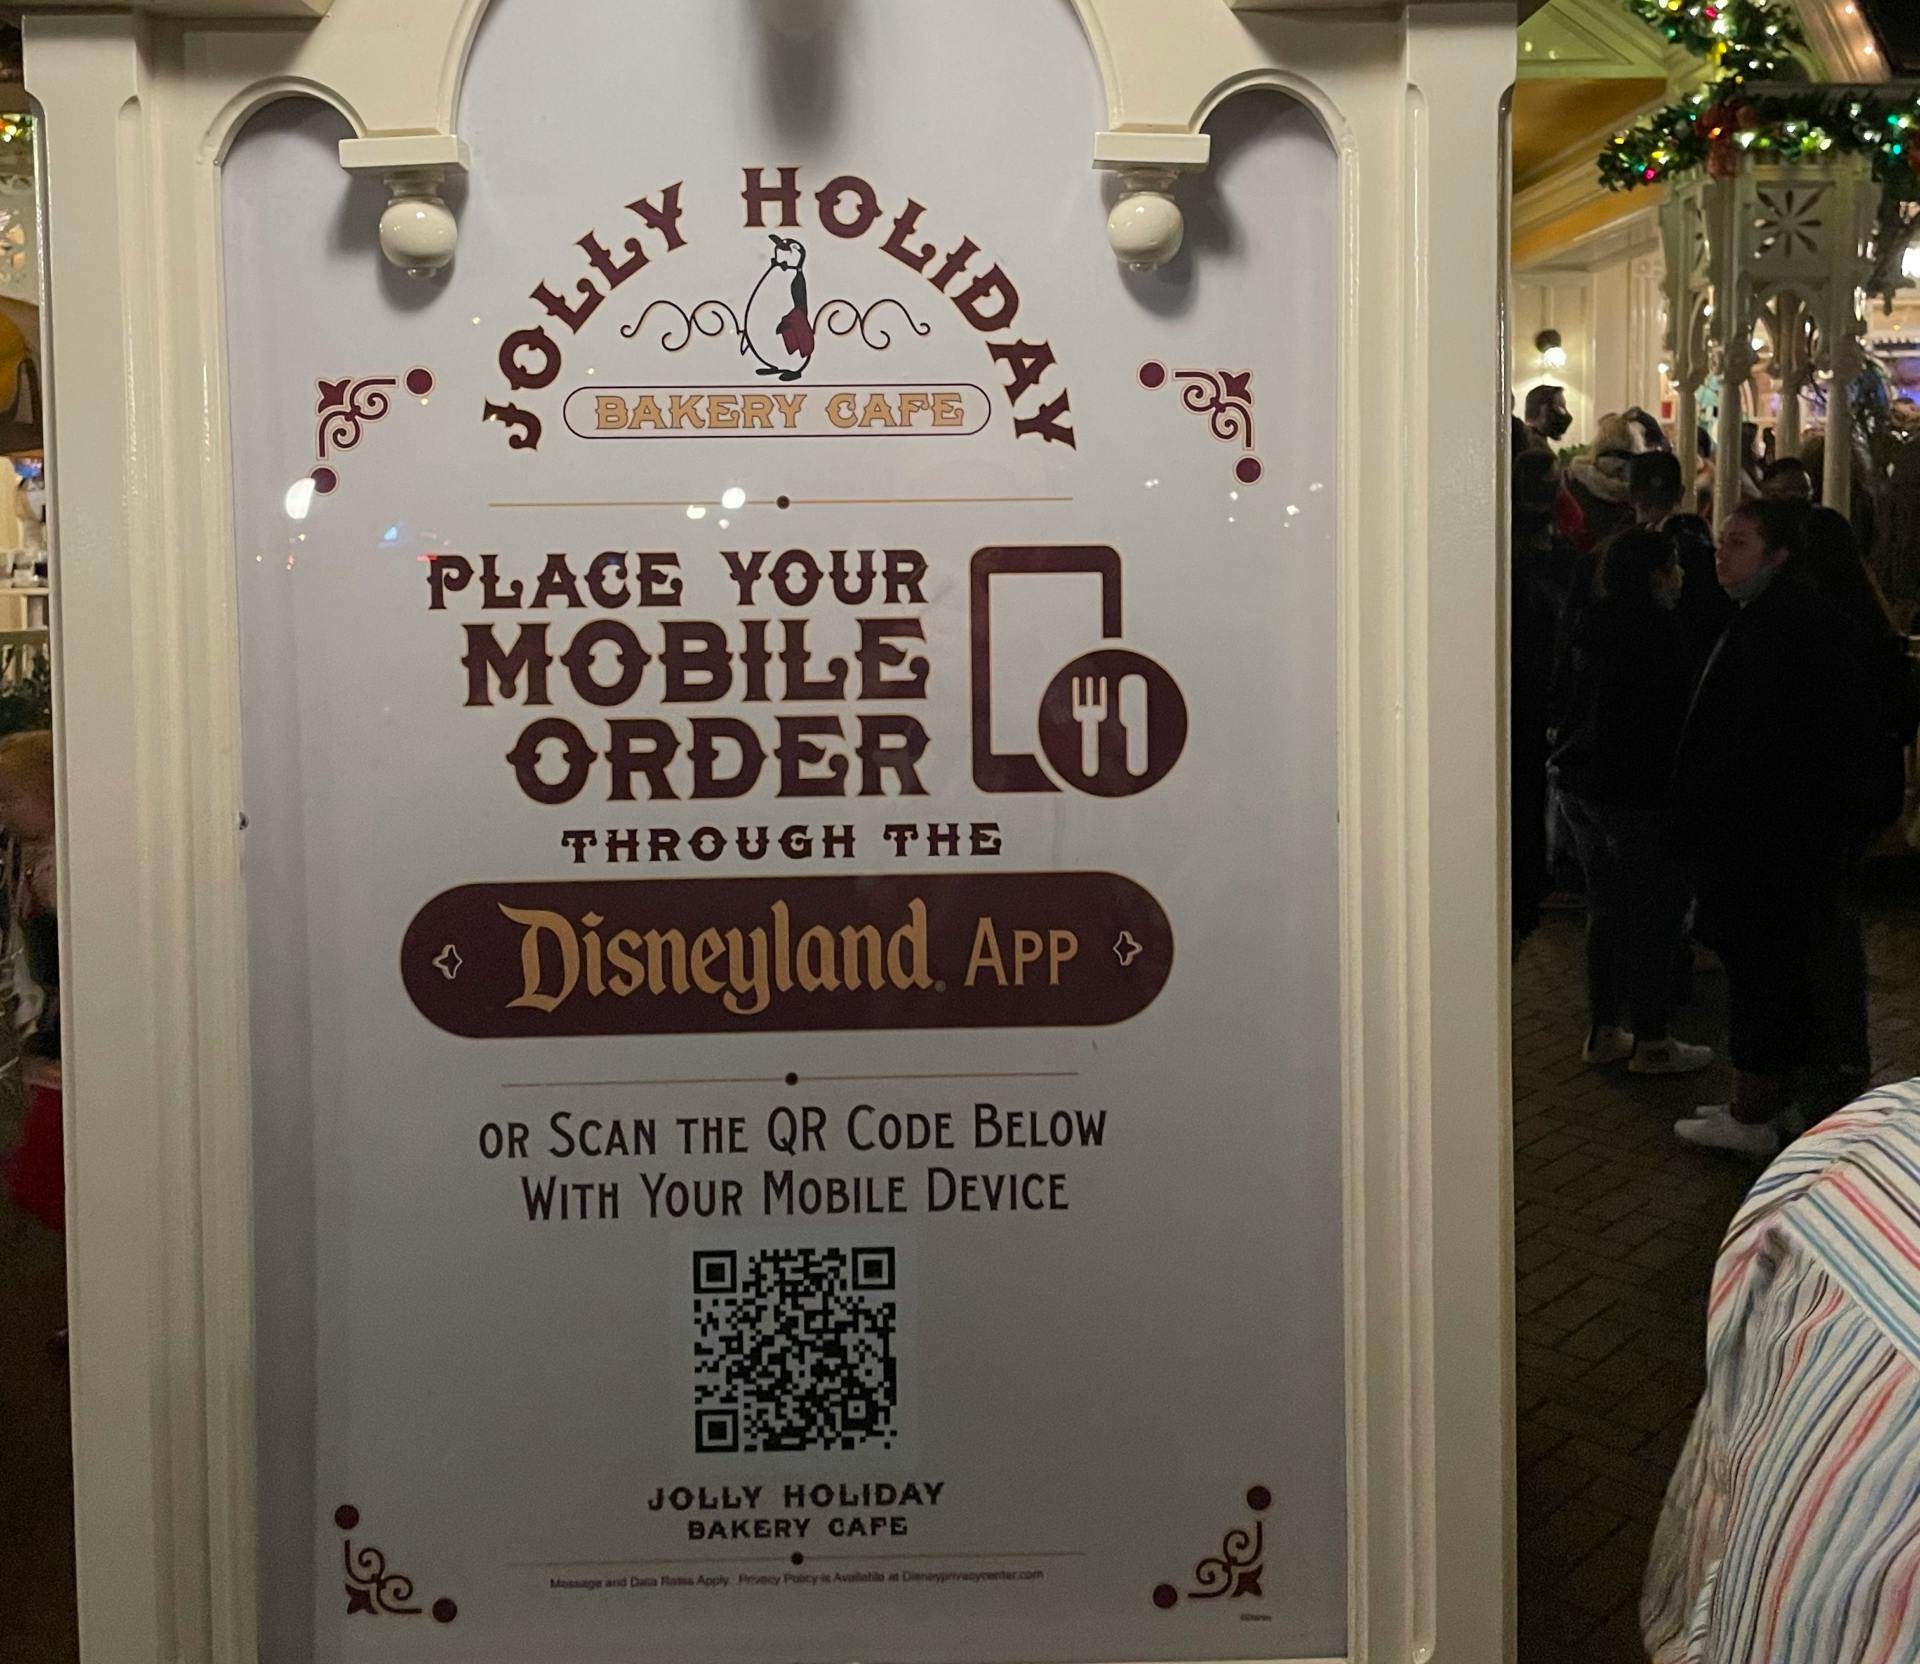 Disneyland's Jolly Holiday Bakery Cafe restaurant sign with mobile ordering instructions.